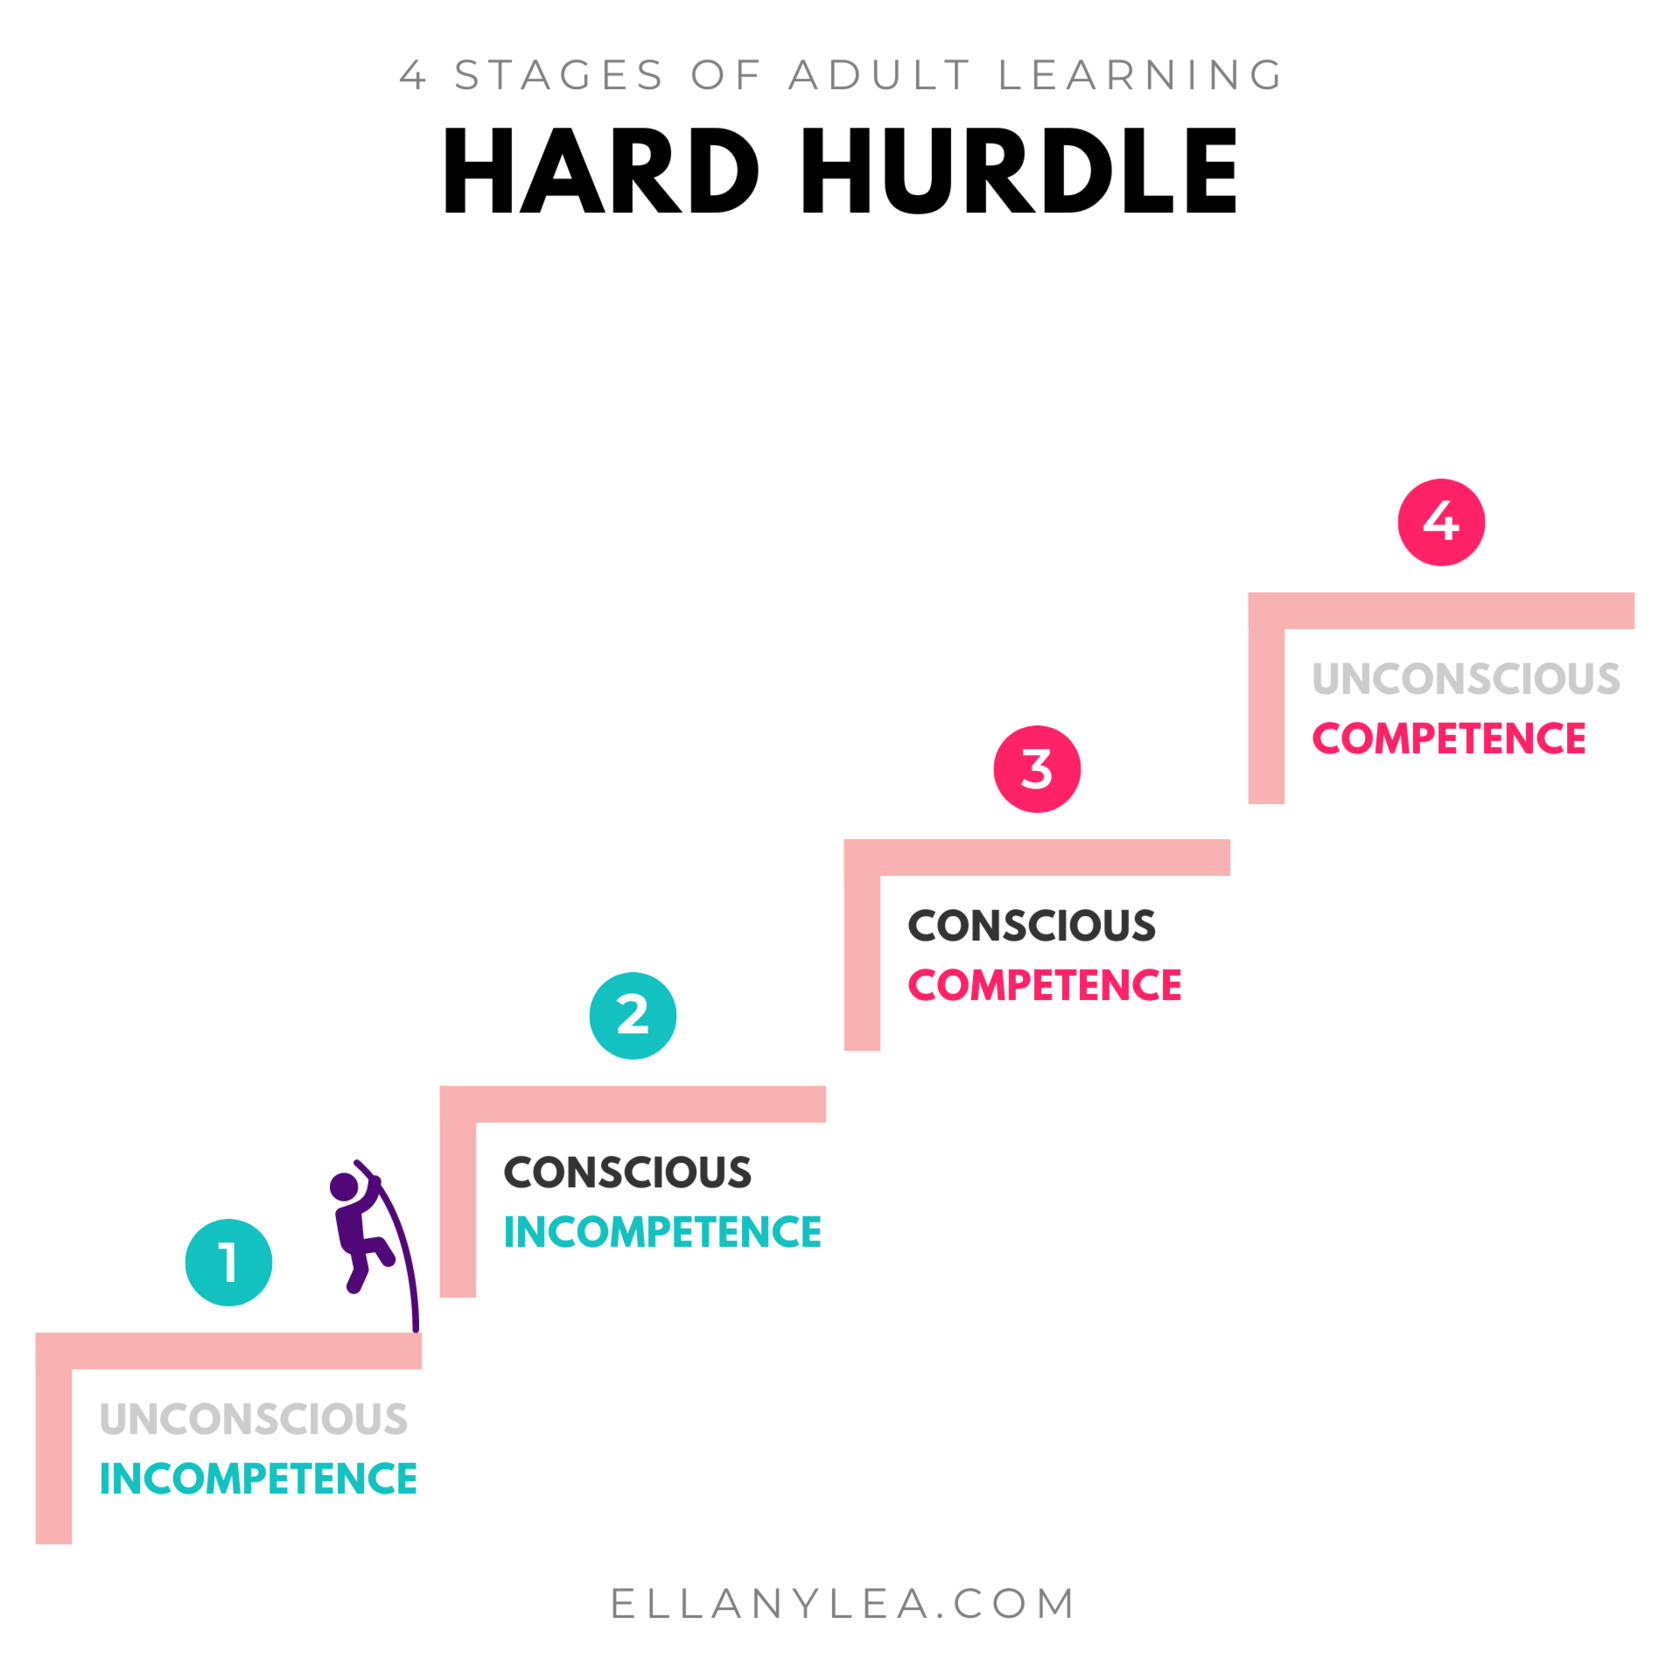 4-Stages-Adult-Learning-Hurdle-Hard